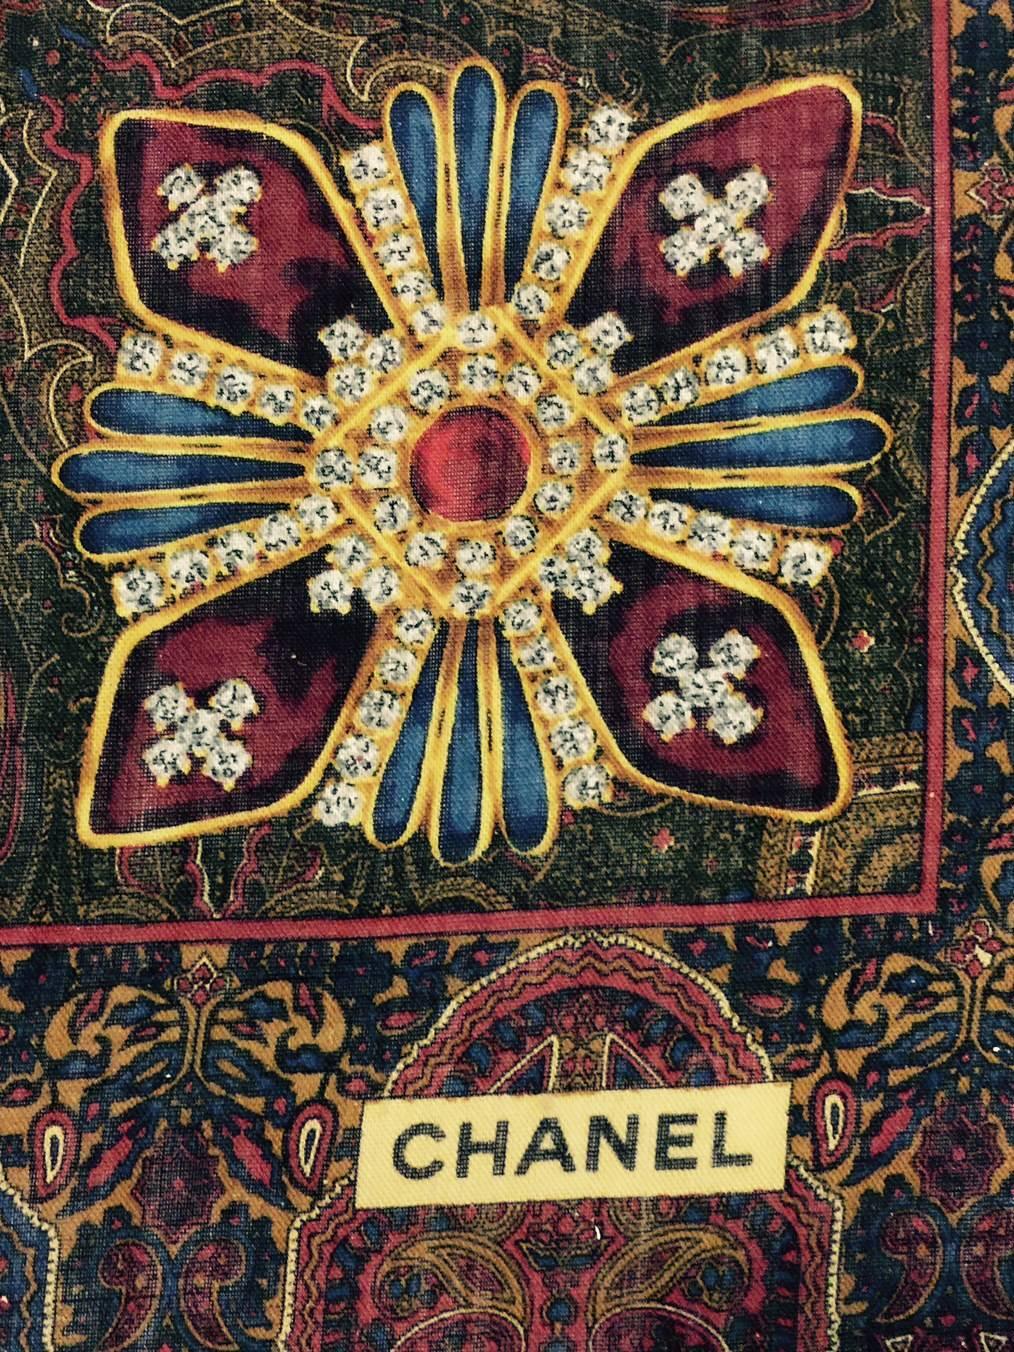 Chanel Wool Blend Printed Shawl  is classic Coco!  Featuring Mademoiselle's signature oversized, bejeweled Gripoix brooches, this substantial shawl is sure to become a 